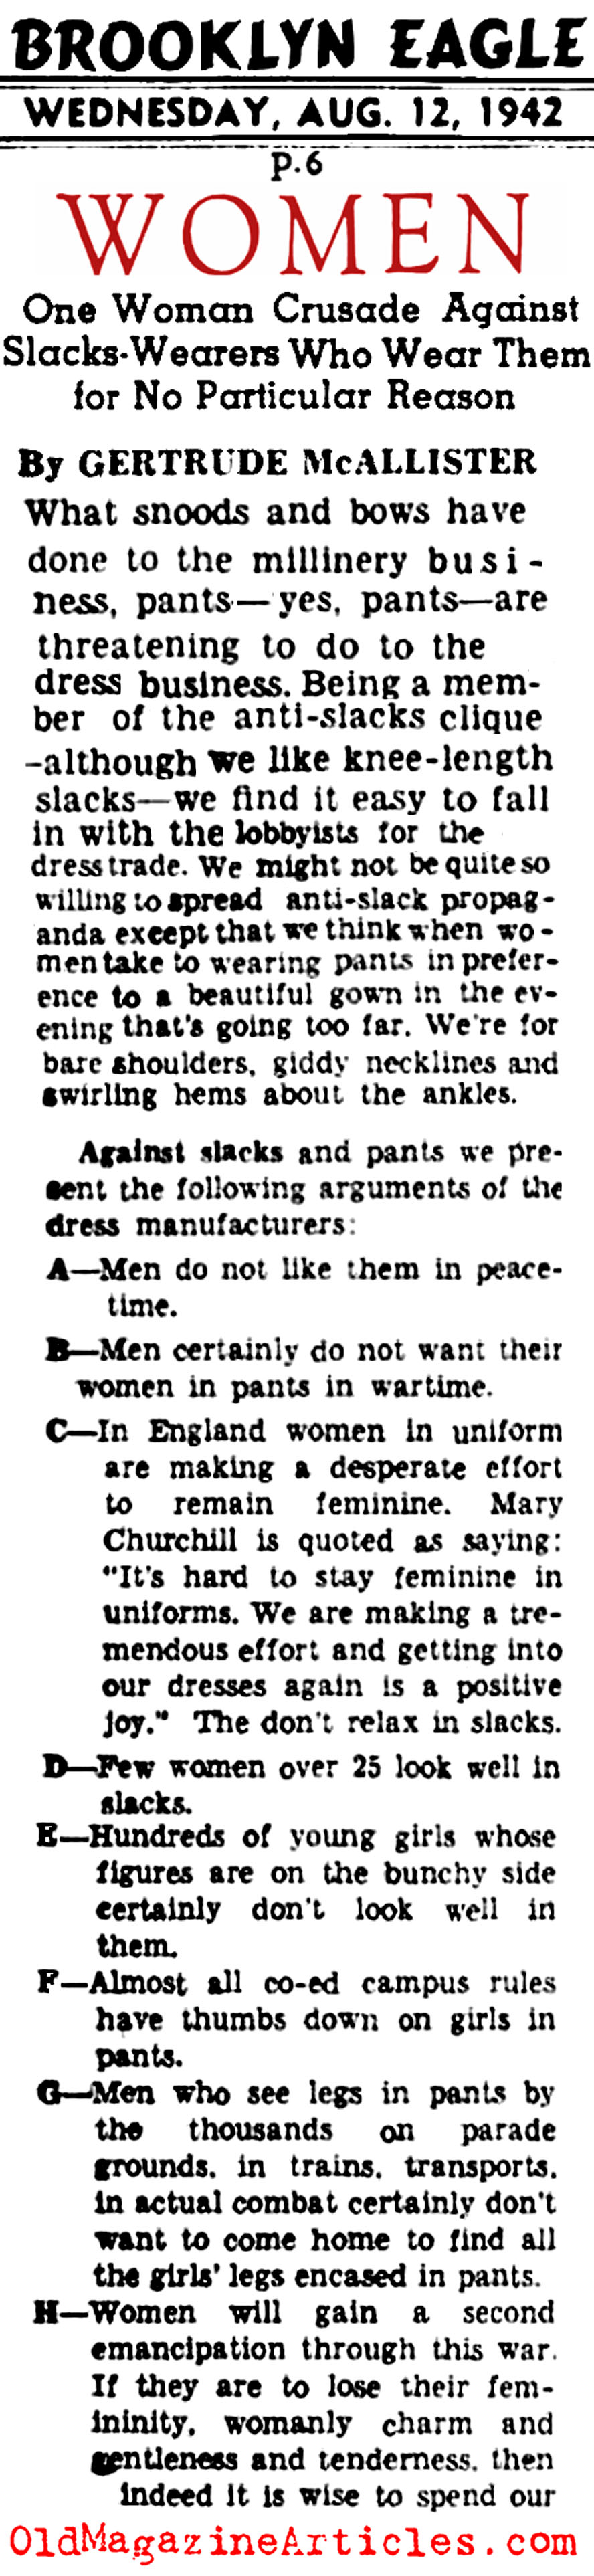 A Smaller War on the Home Front (Brooklyn Eagle, 1942)